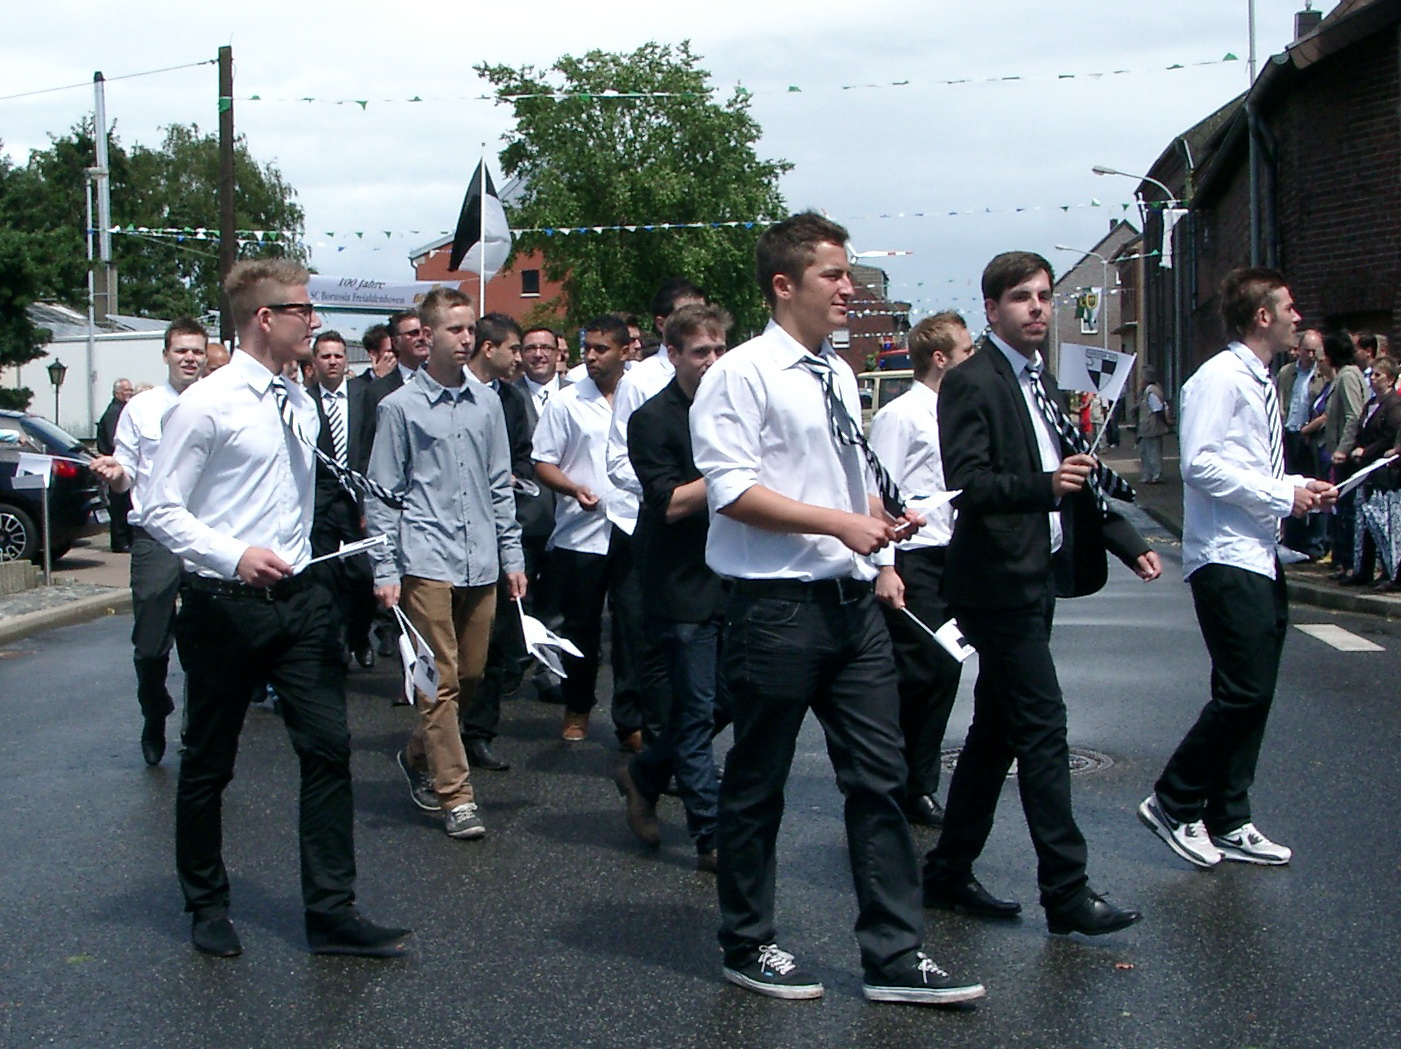 the men are walking in the street with their ties on